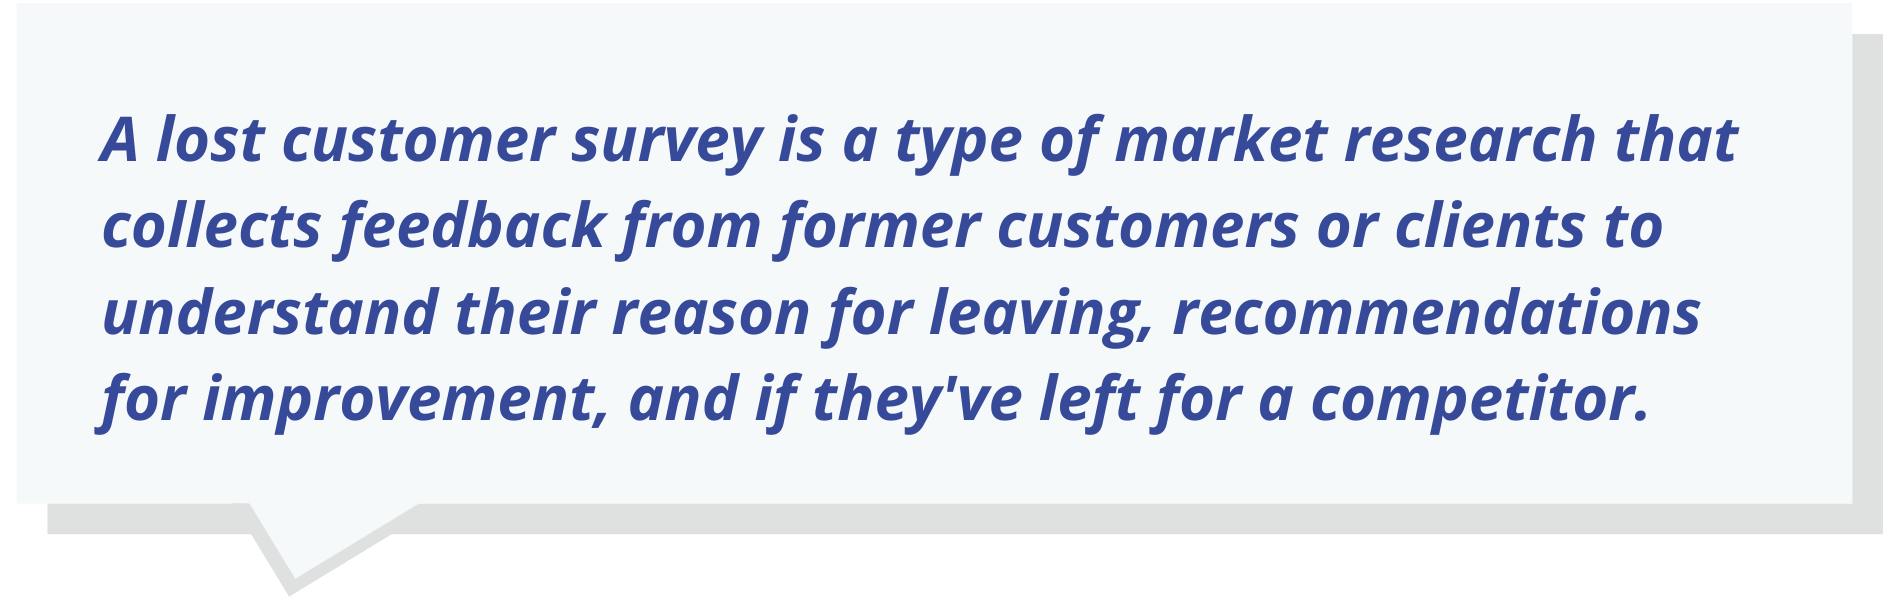 A lost customer survey is a type of market research that collects feedback from former customers or clients to understand their reason for leaving, recommendations for improvement, and if they've left for a competitor.